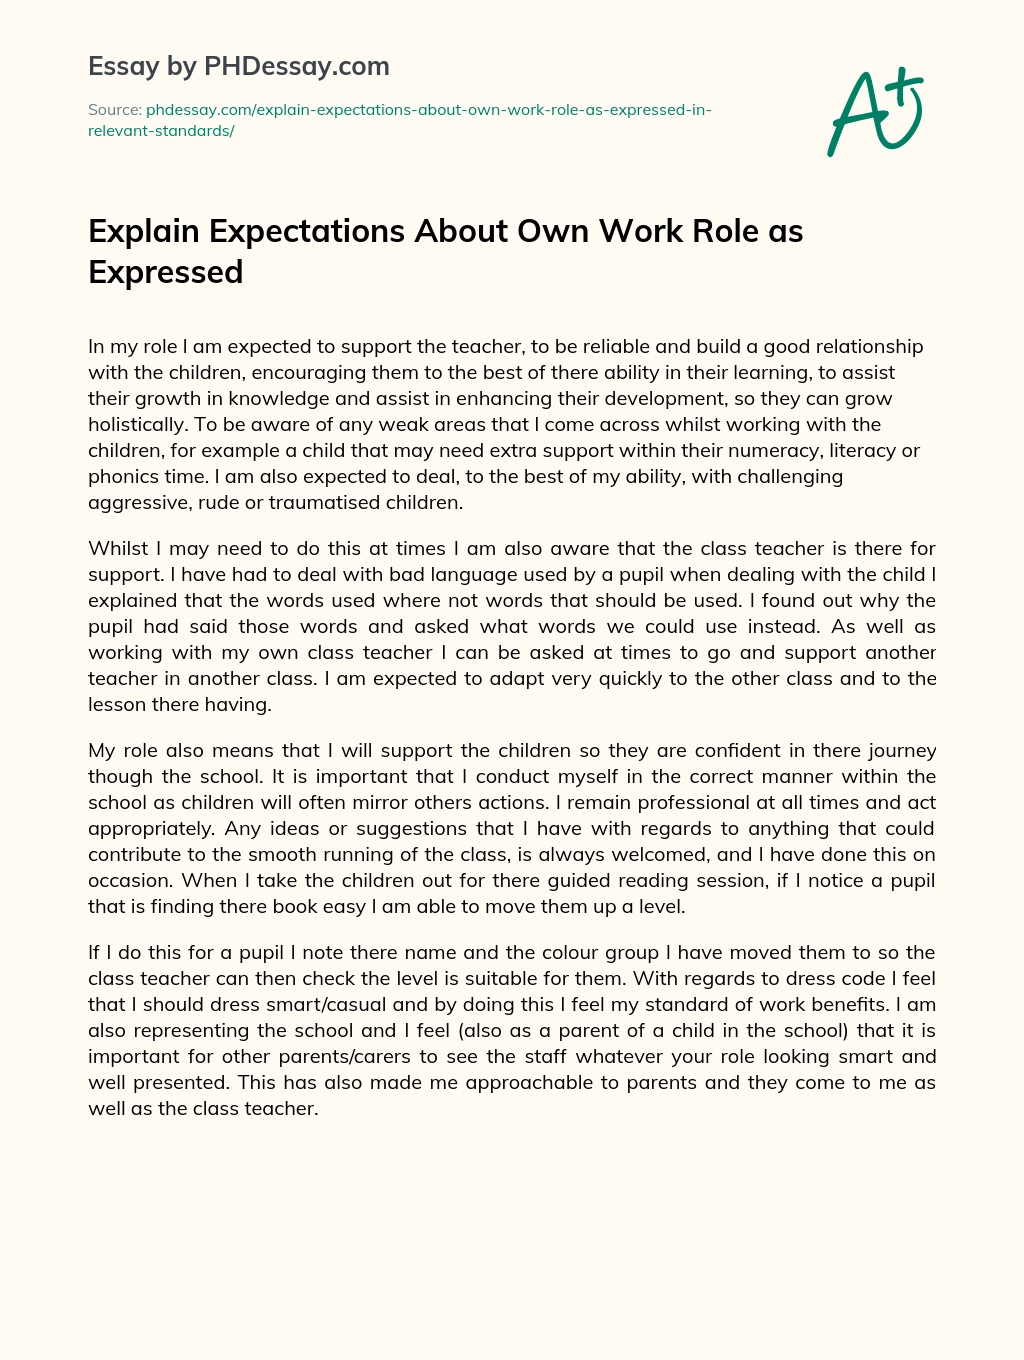 explain expectations about own work role